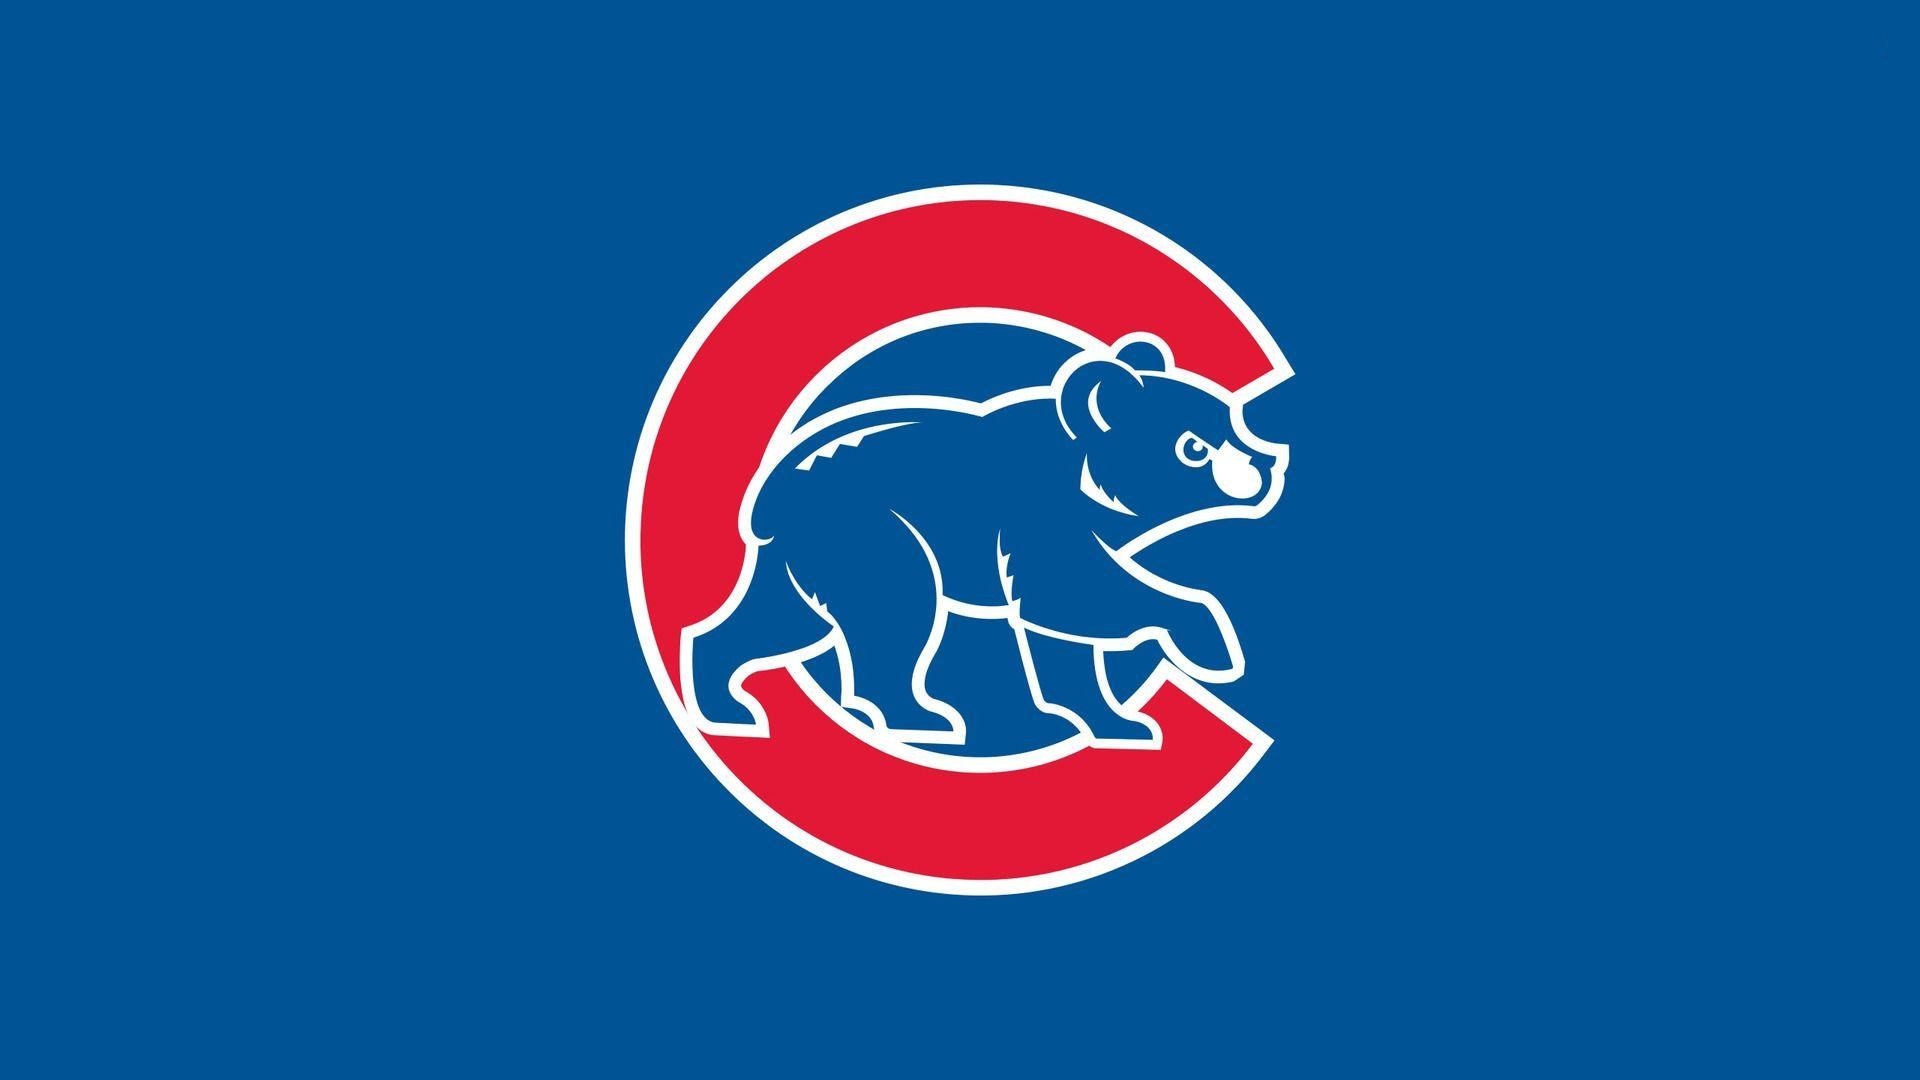 Chicago Cubs MLB Wallpaper HD with high-resolution 1920x1080 pixel. You can use this wallpaper for Mac Desktop Wallpaper, Laptop Screensavers, Android Wallpapers, Tablet or iPhone Home Screen and another mobile phone device